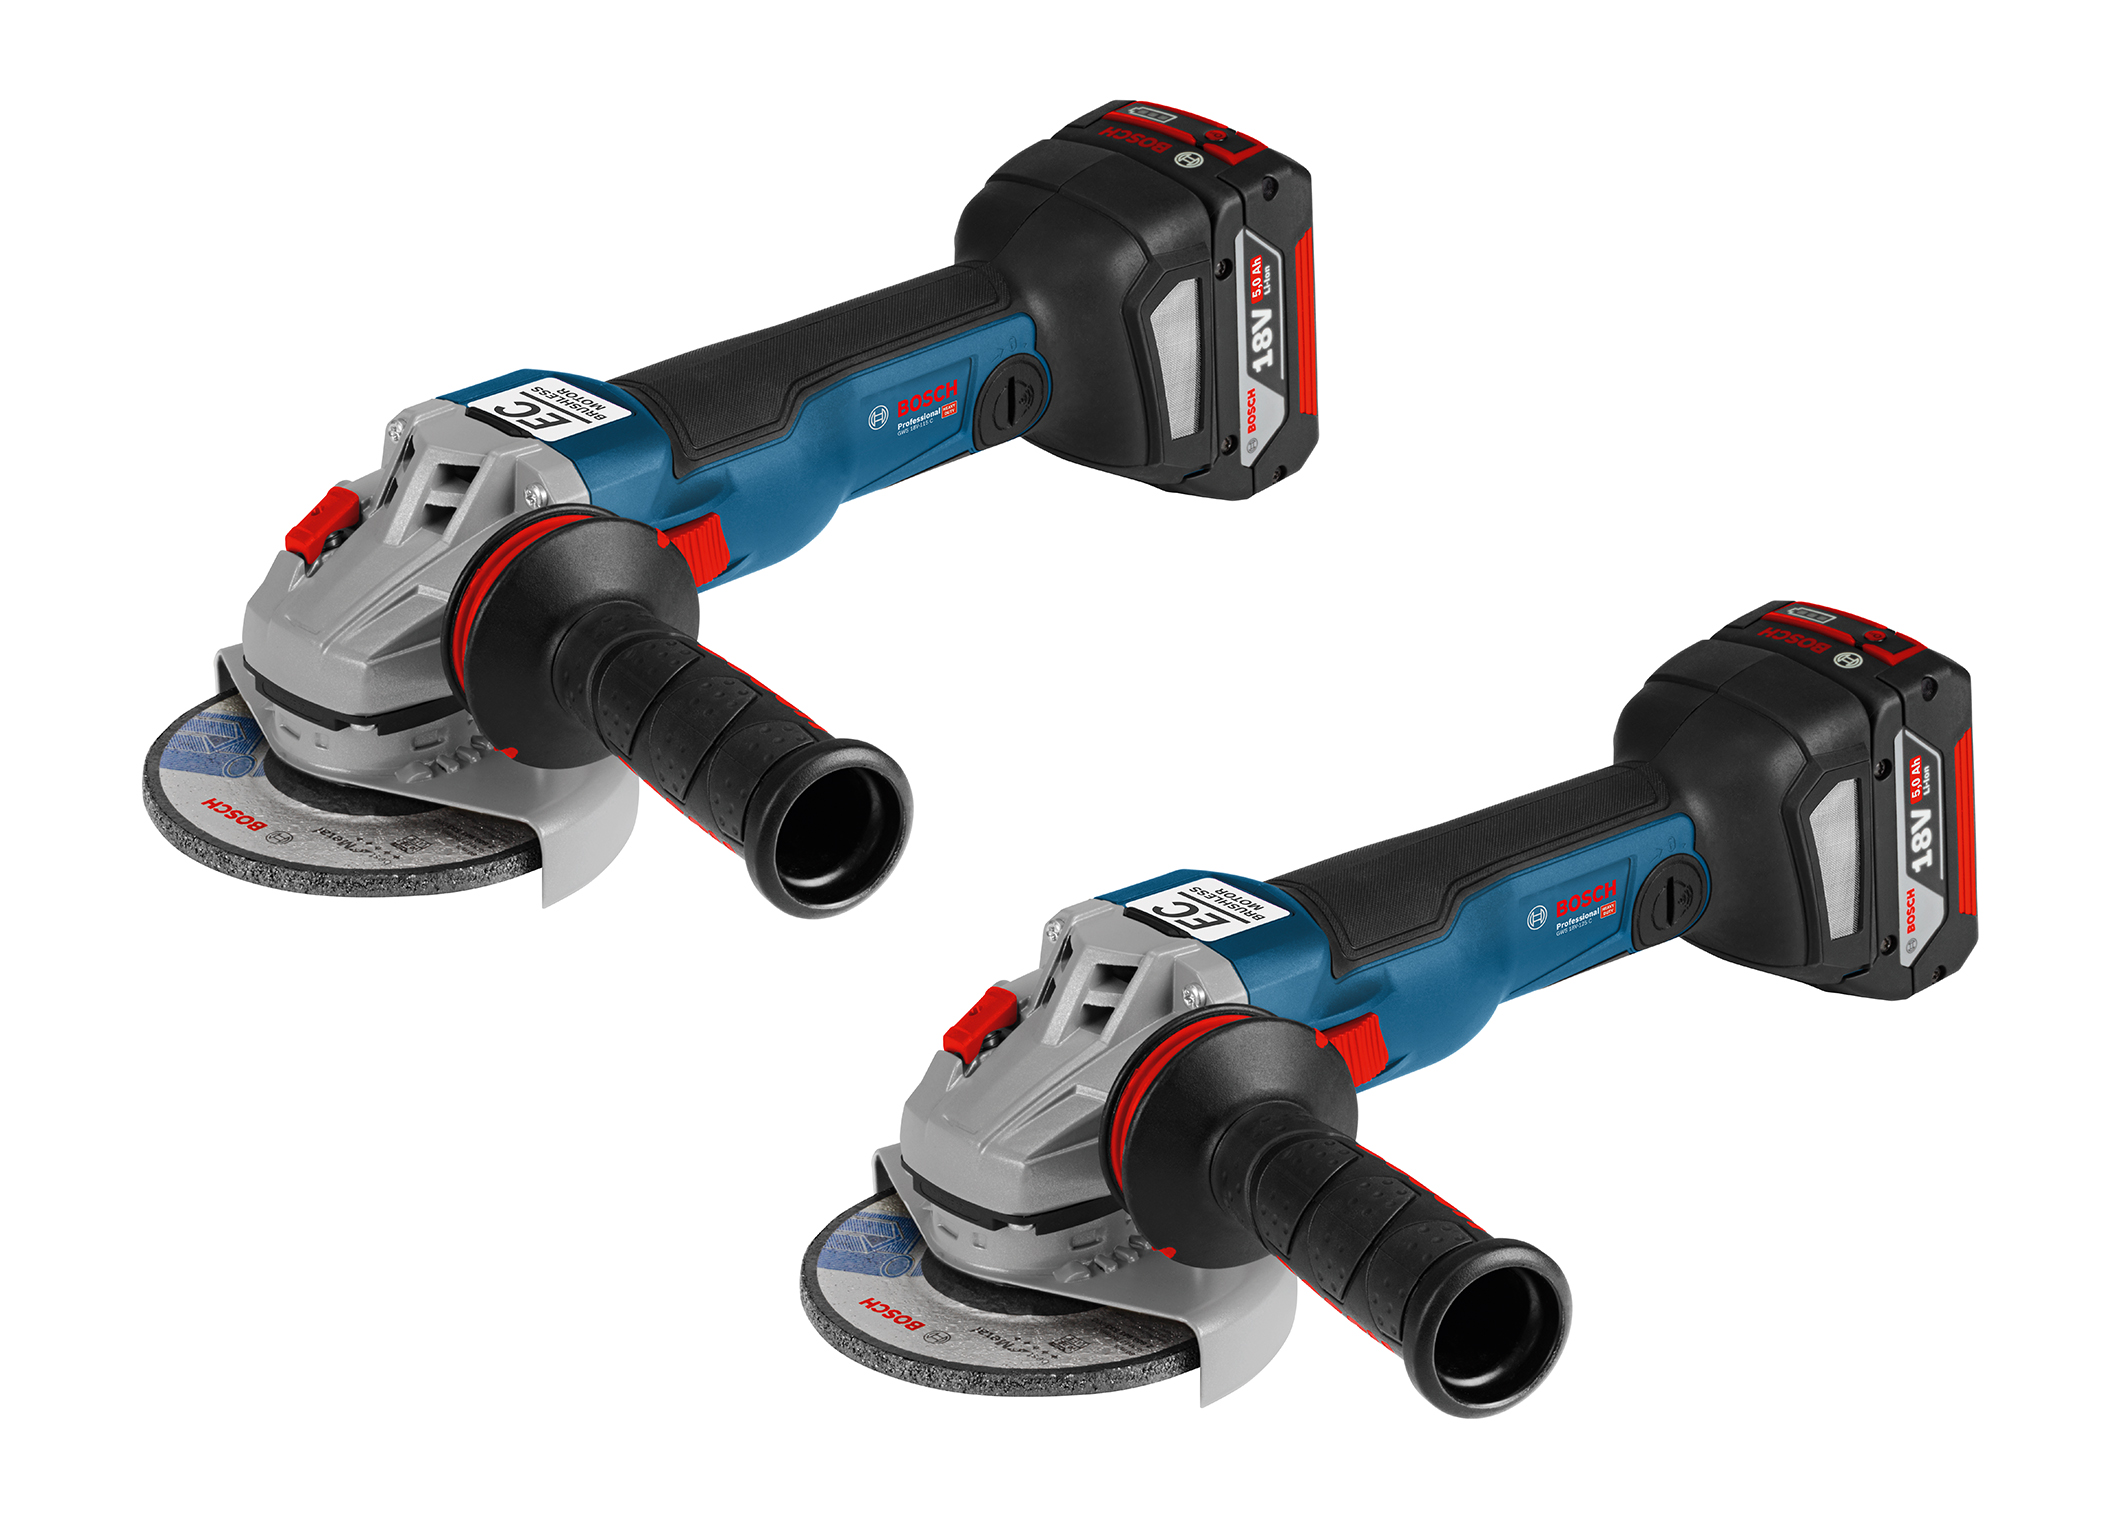 Increased efficiency and ease of use for professionals: world’s first connectivity angle grinders from Bosch 